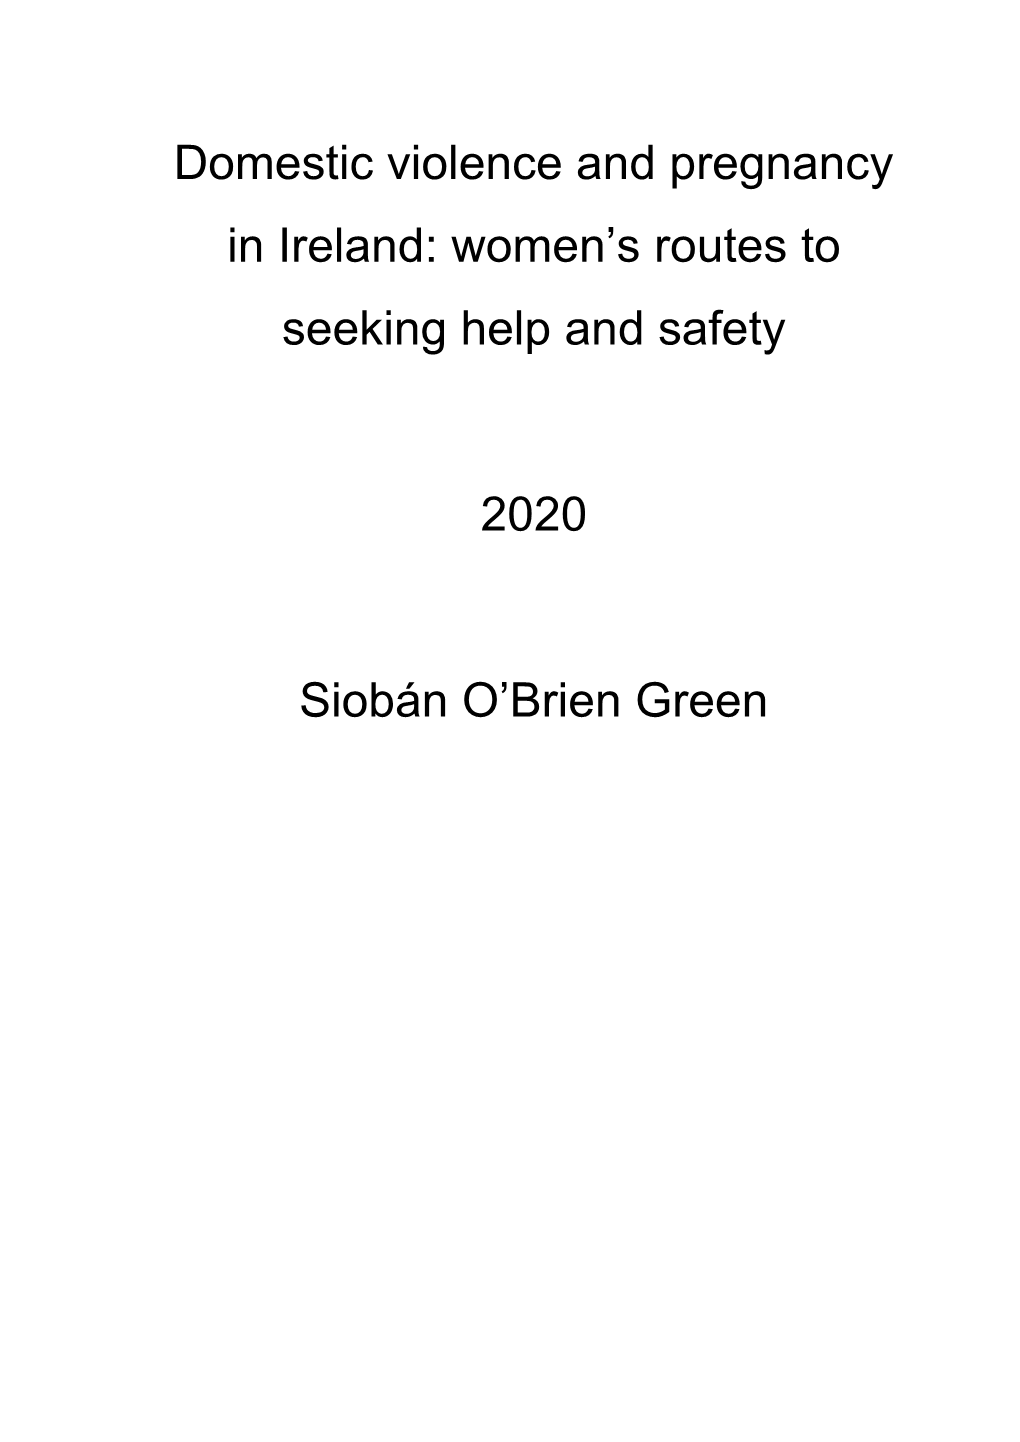 Domestic Violence and Pregnancy in Ireland: Women’S Routes to Seeking Help and Safety